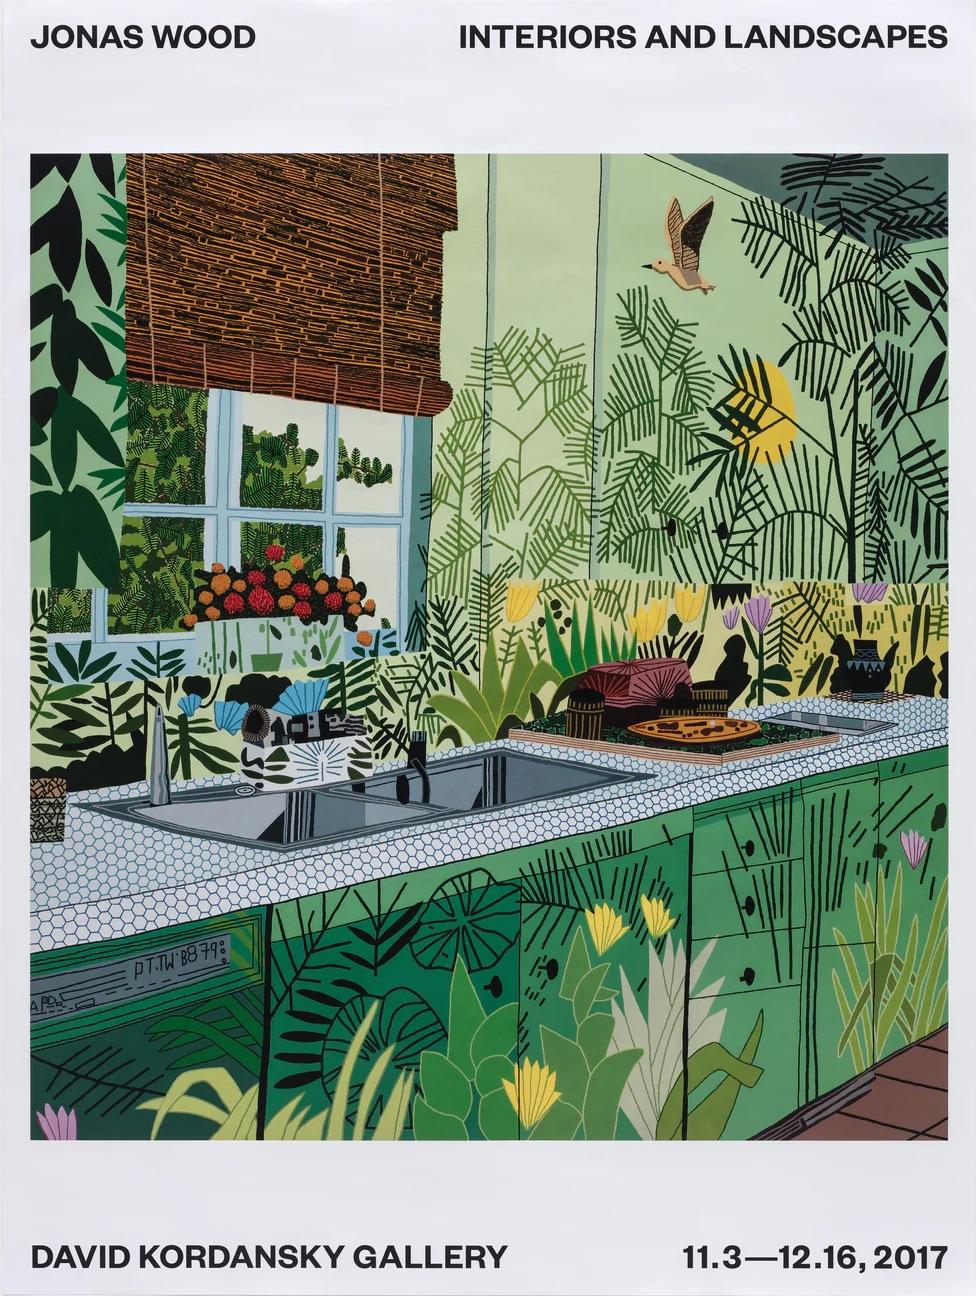 Jonas Wood
Interiors and Landscapes Exhibition Poster, 2017
Poster
24 × 18 in | 61 × 45.7 cm